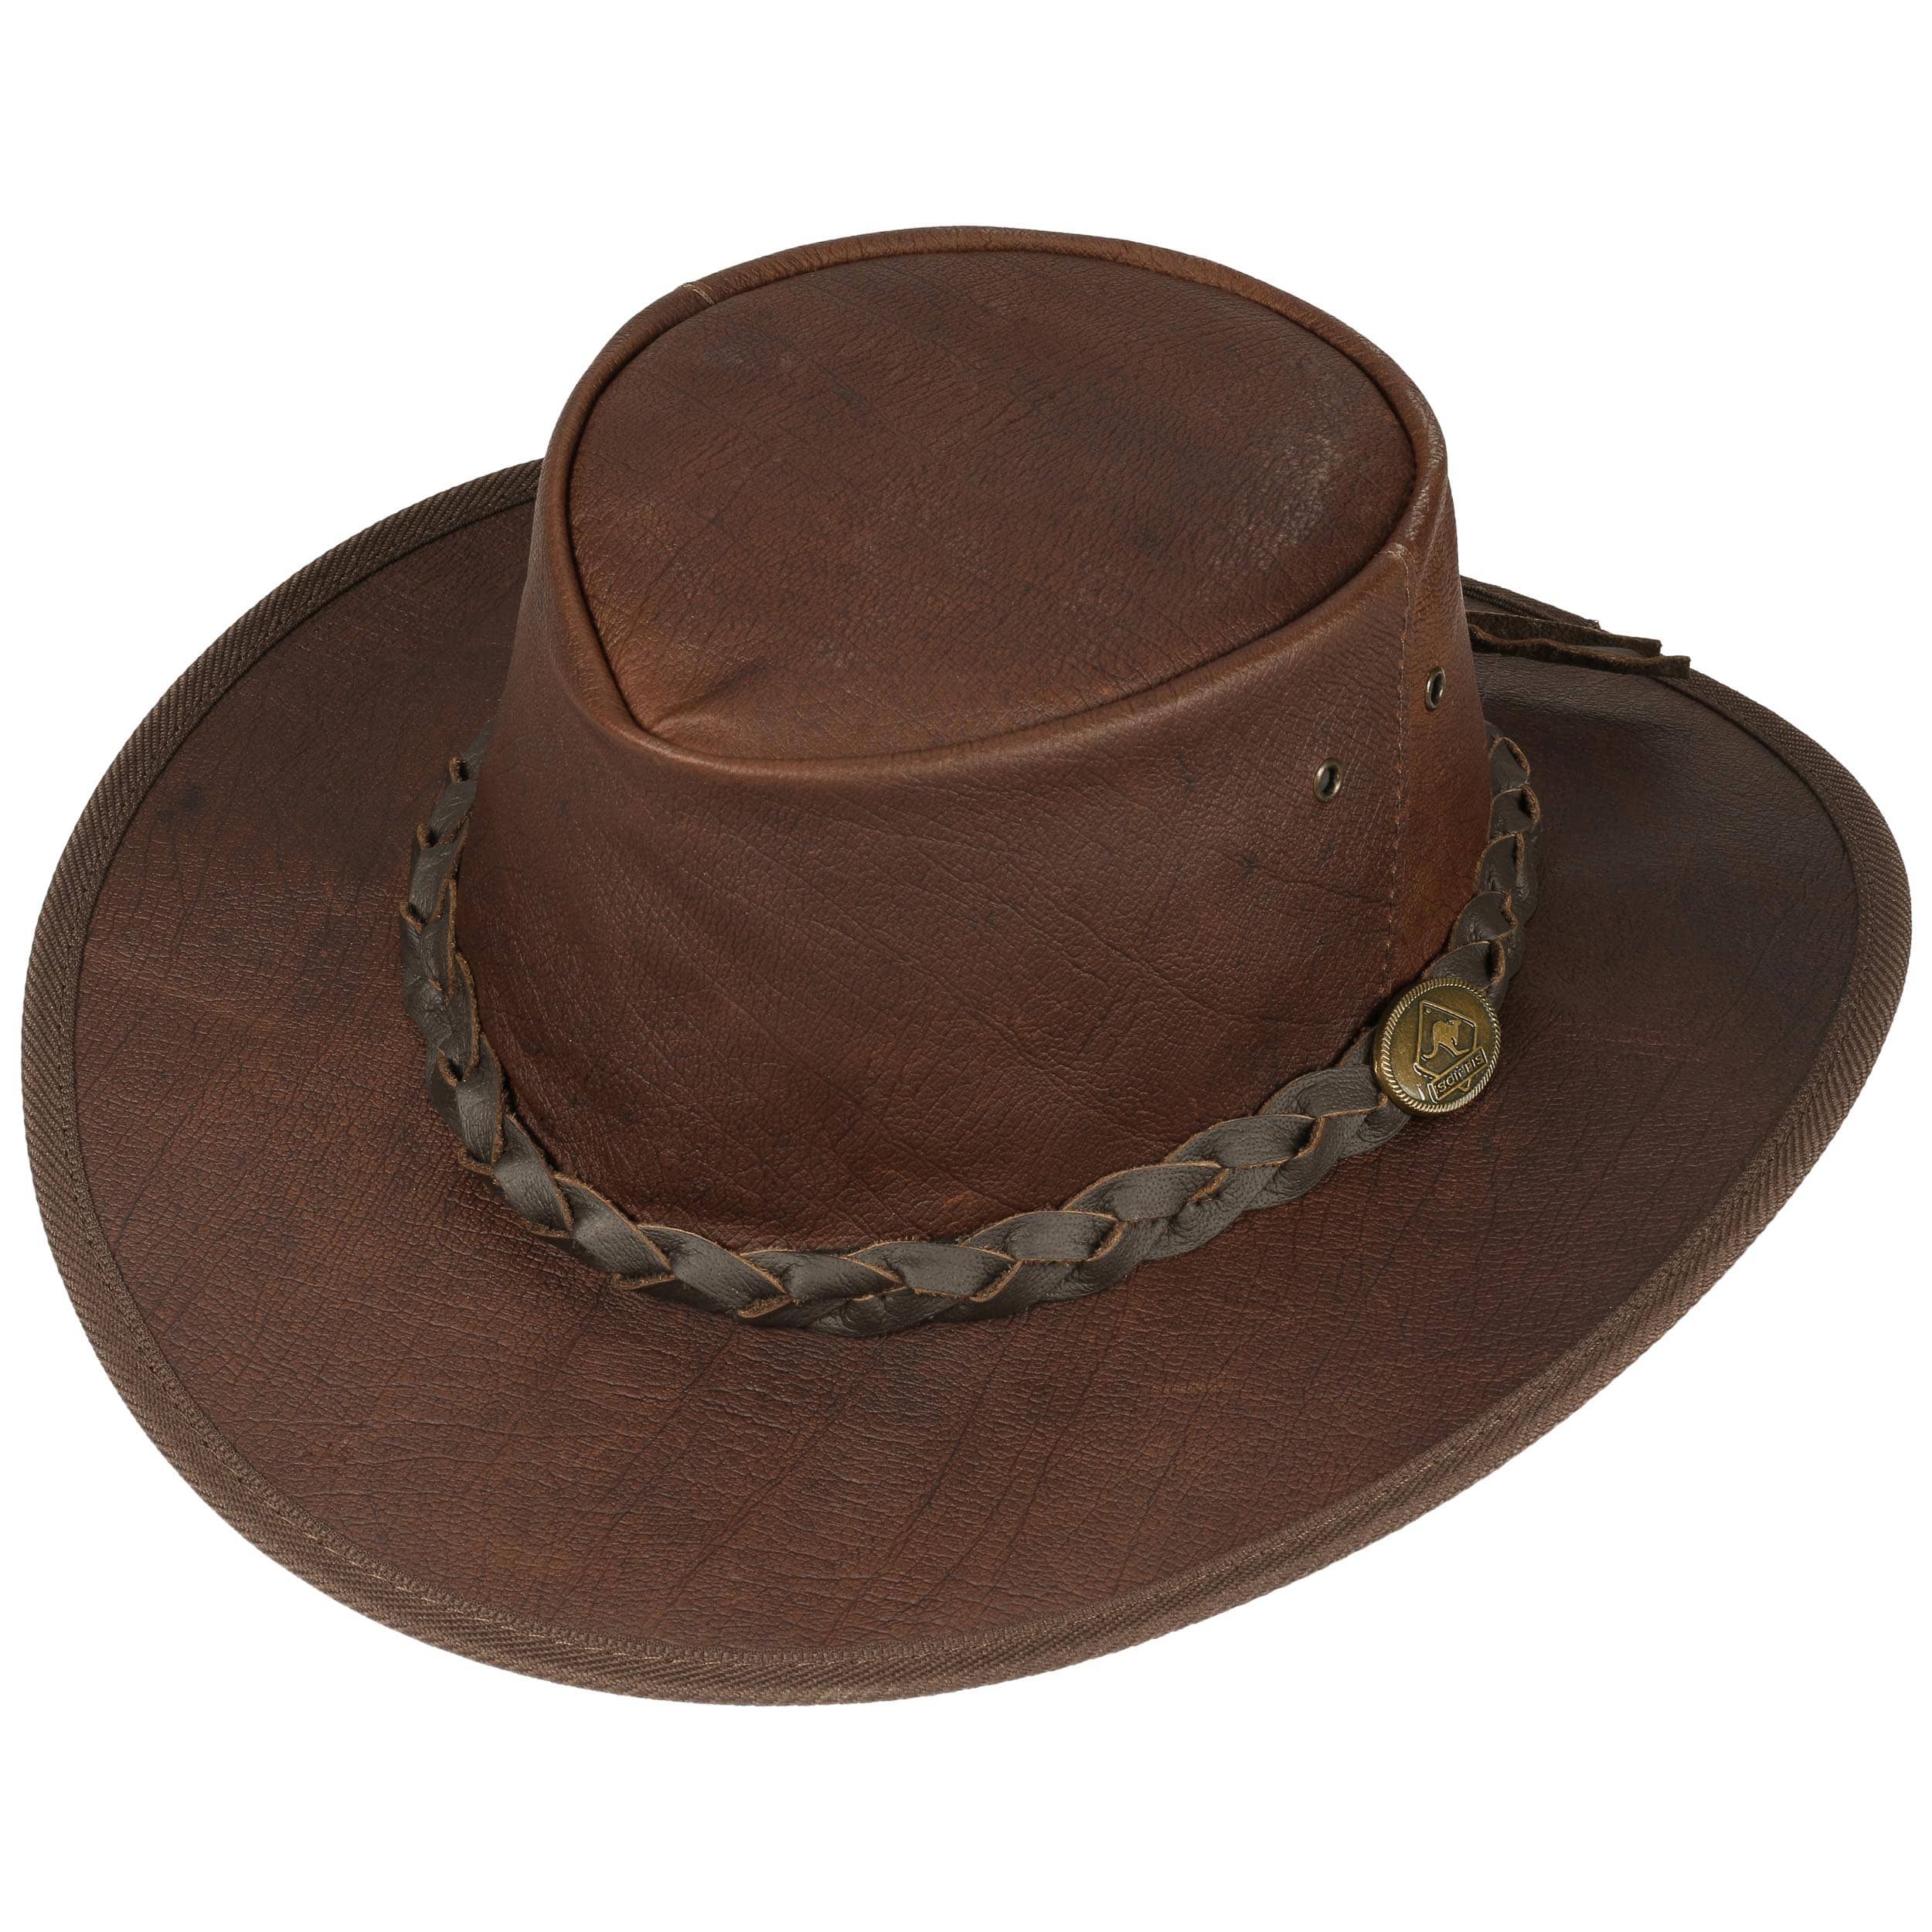 Dawson Kangaroo Leather Hat by Scippis - 98,95